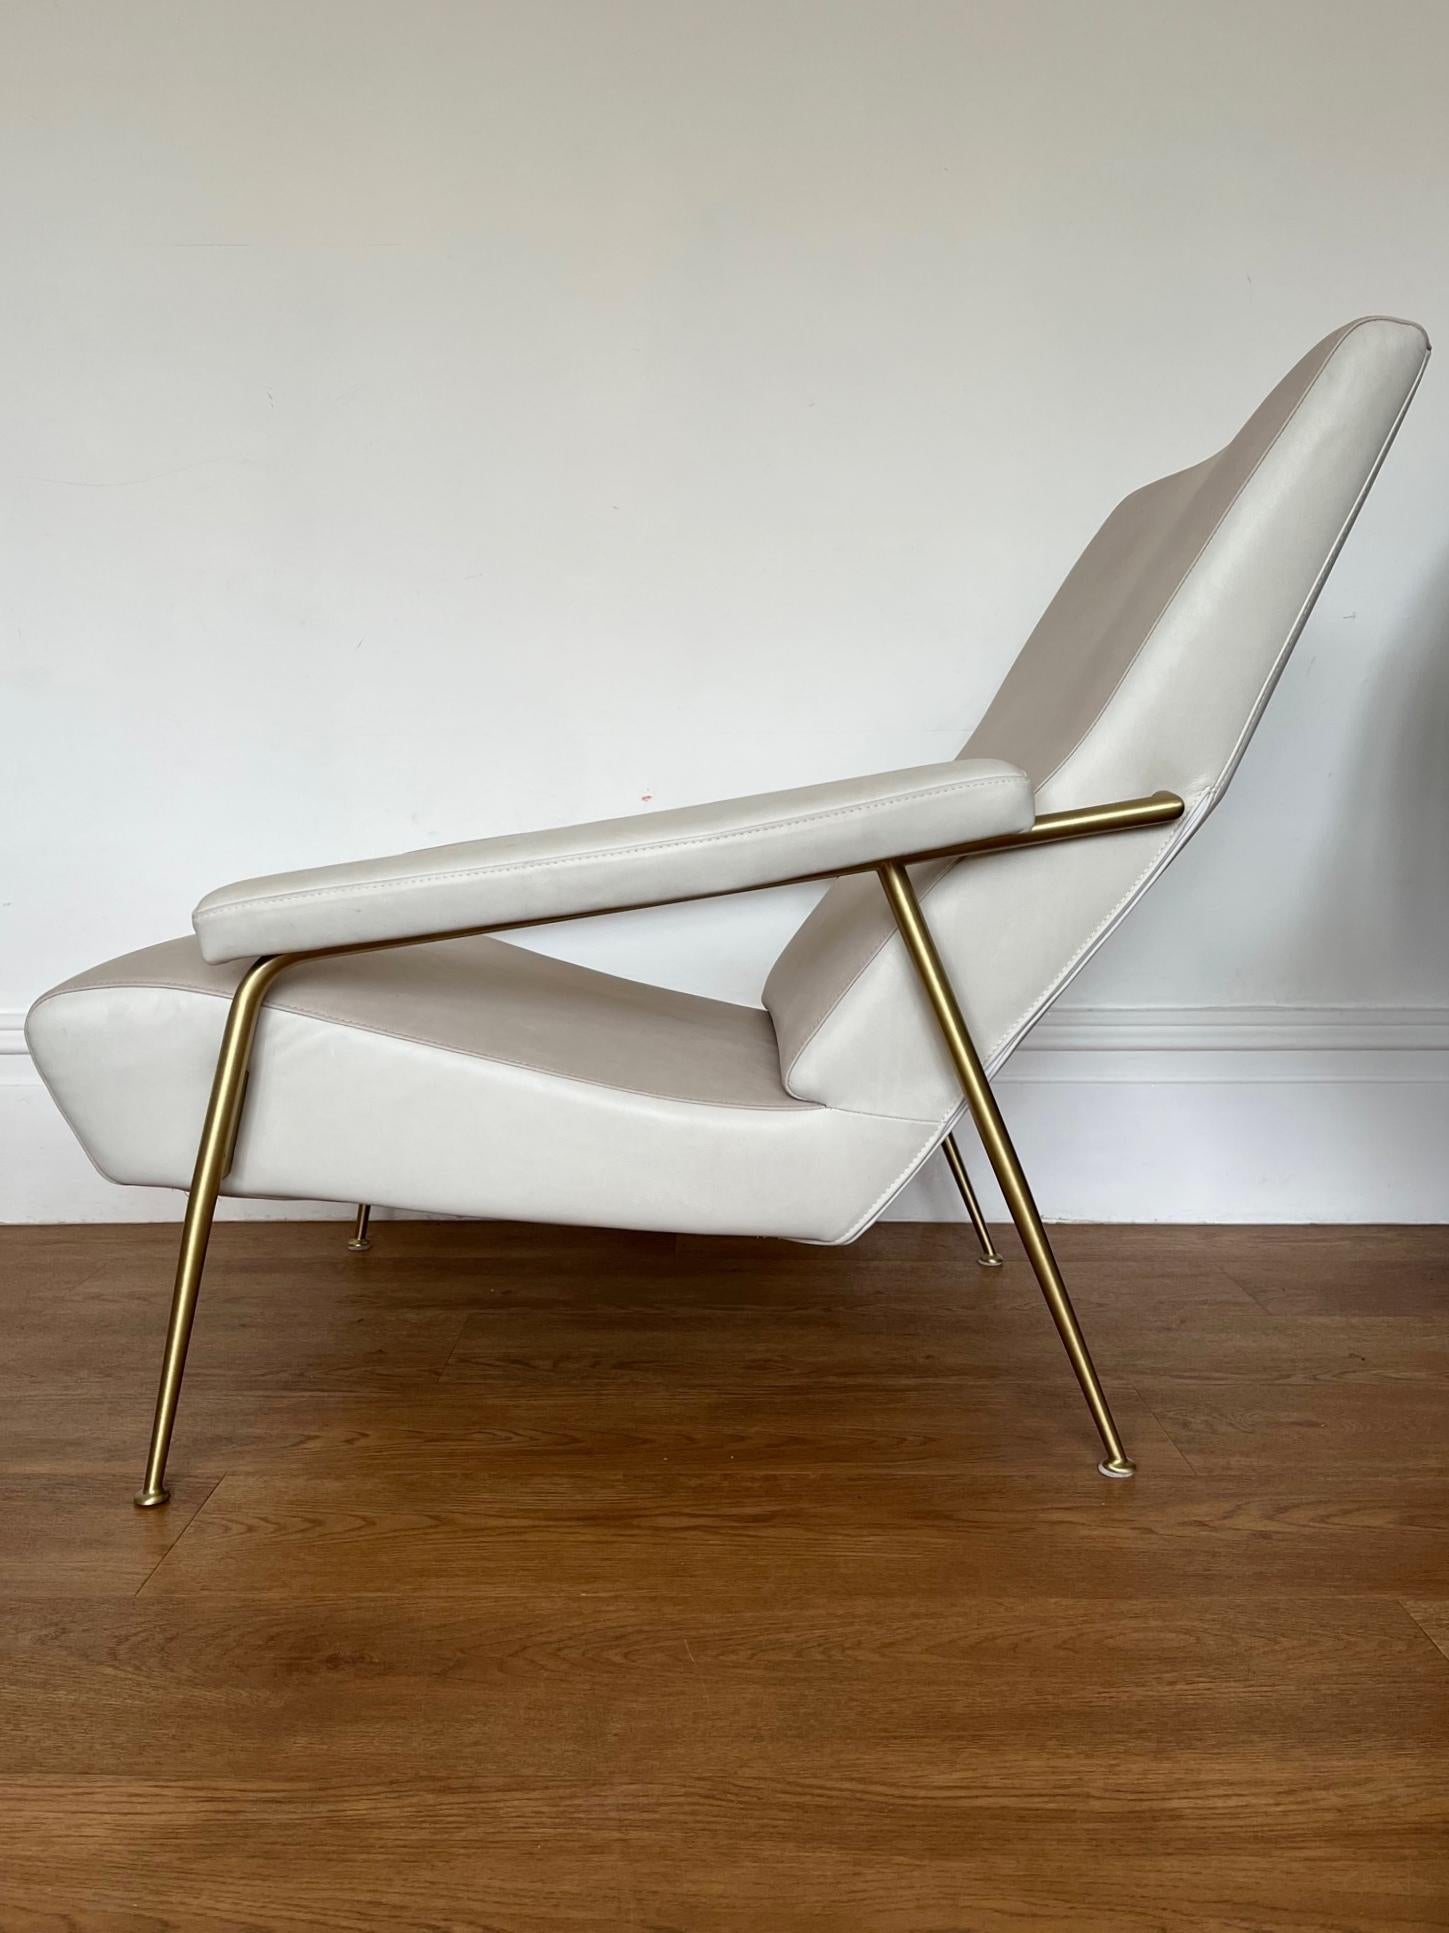 Originally designed by Italian master architect Gio Ponti in 1953 and re released in 2012 by Molteni & C.

The chair features two tone sand/paper leather with satin brass frame and legs.

The chair shows some minor signs of use with some light